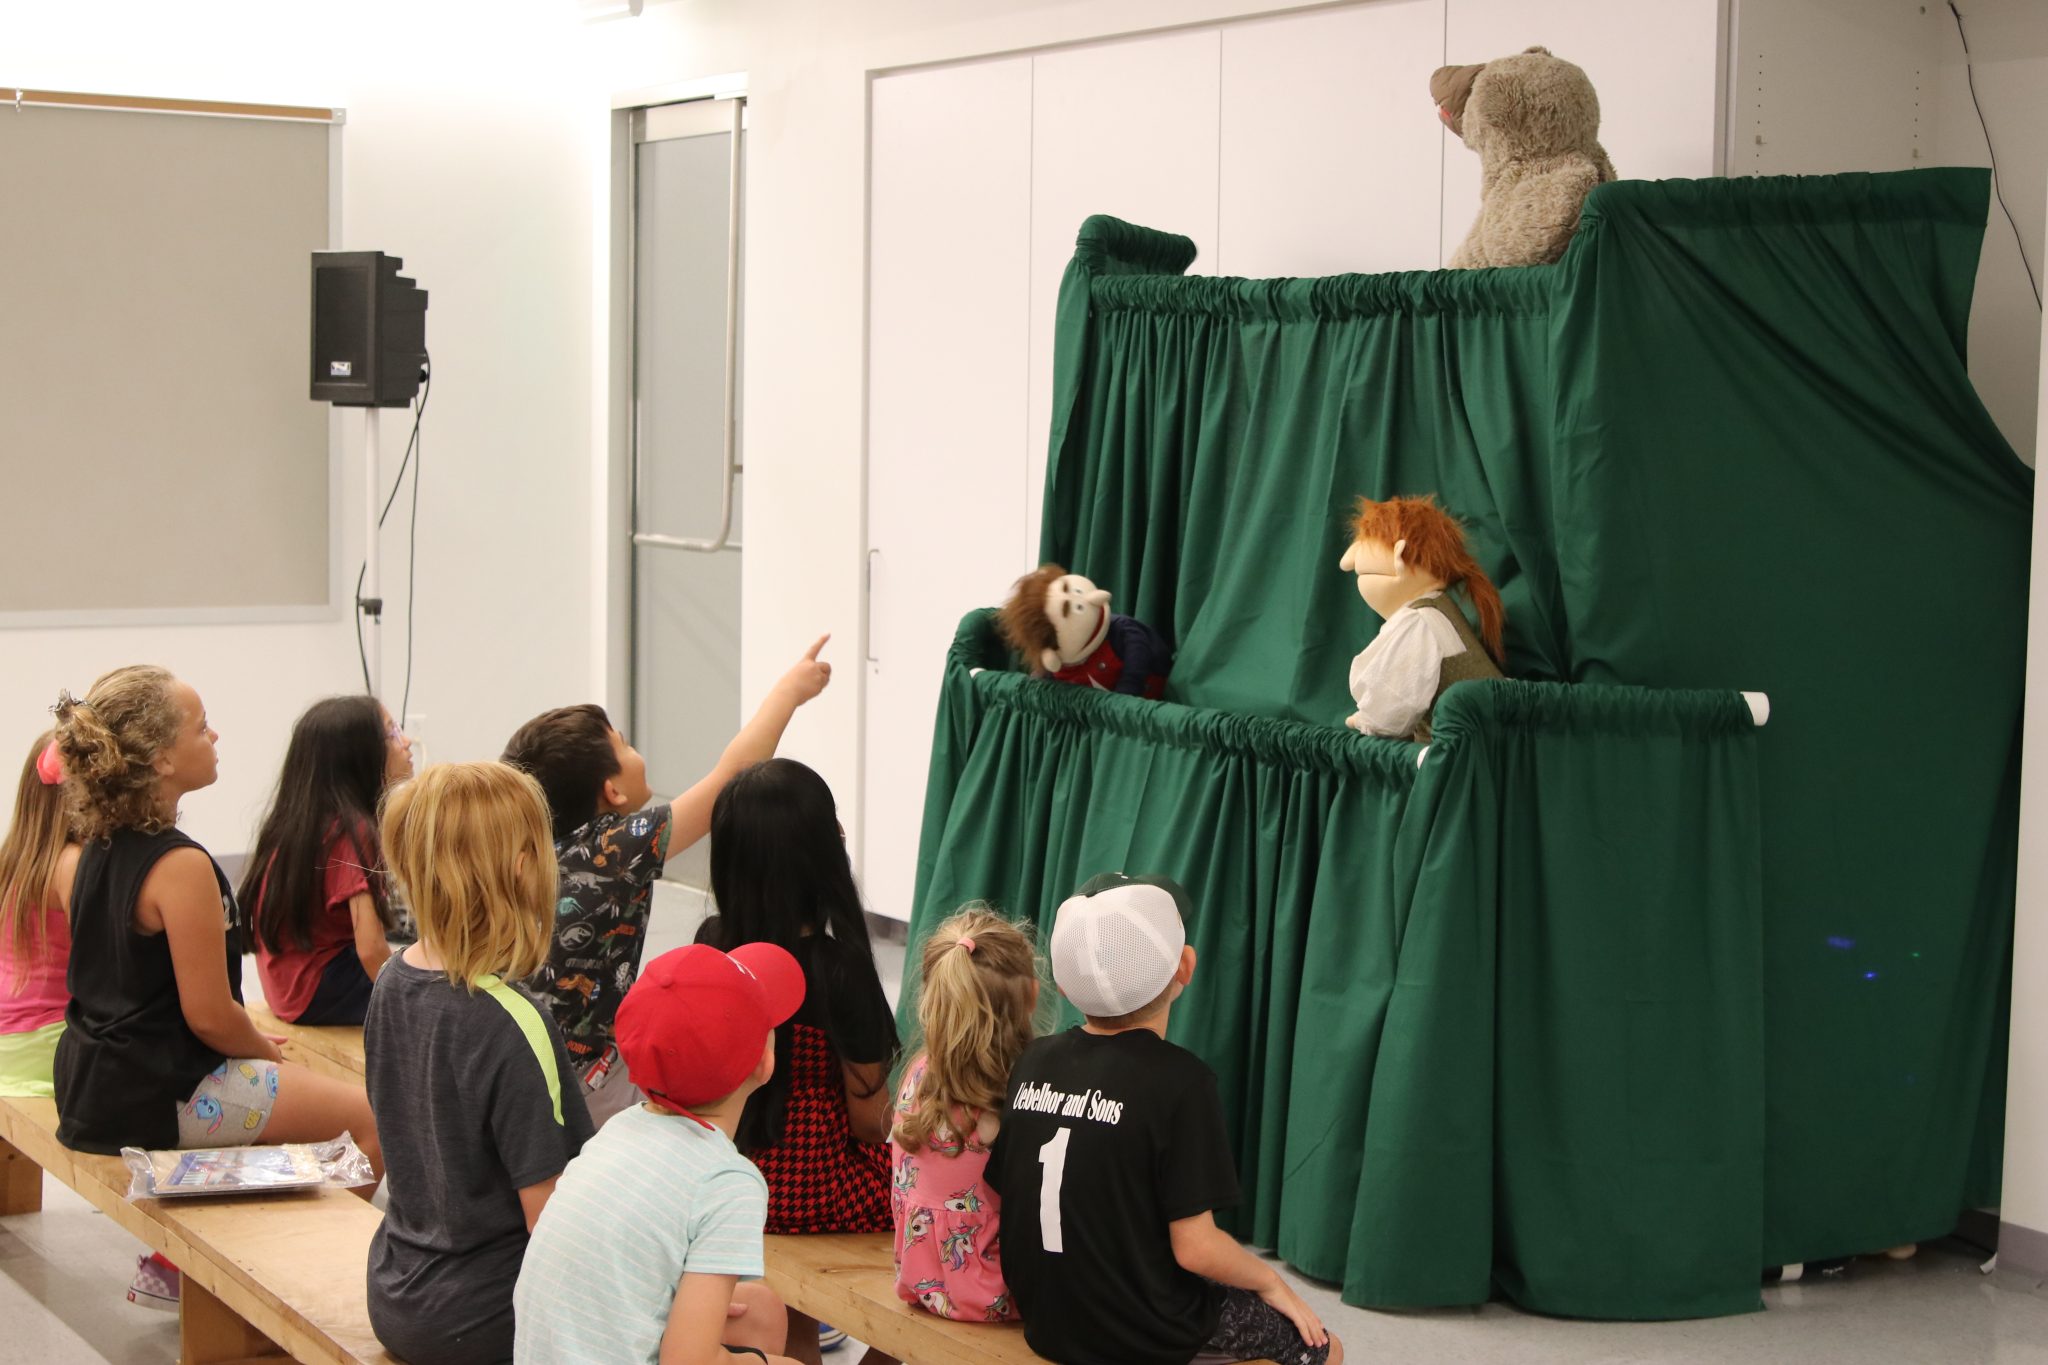 National Park Service Rangers put on a puppet show for a group of children inside the Education Center at Gateway Arch National Park. (Photo provided by NPS)